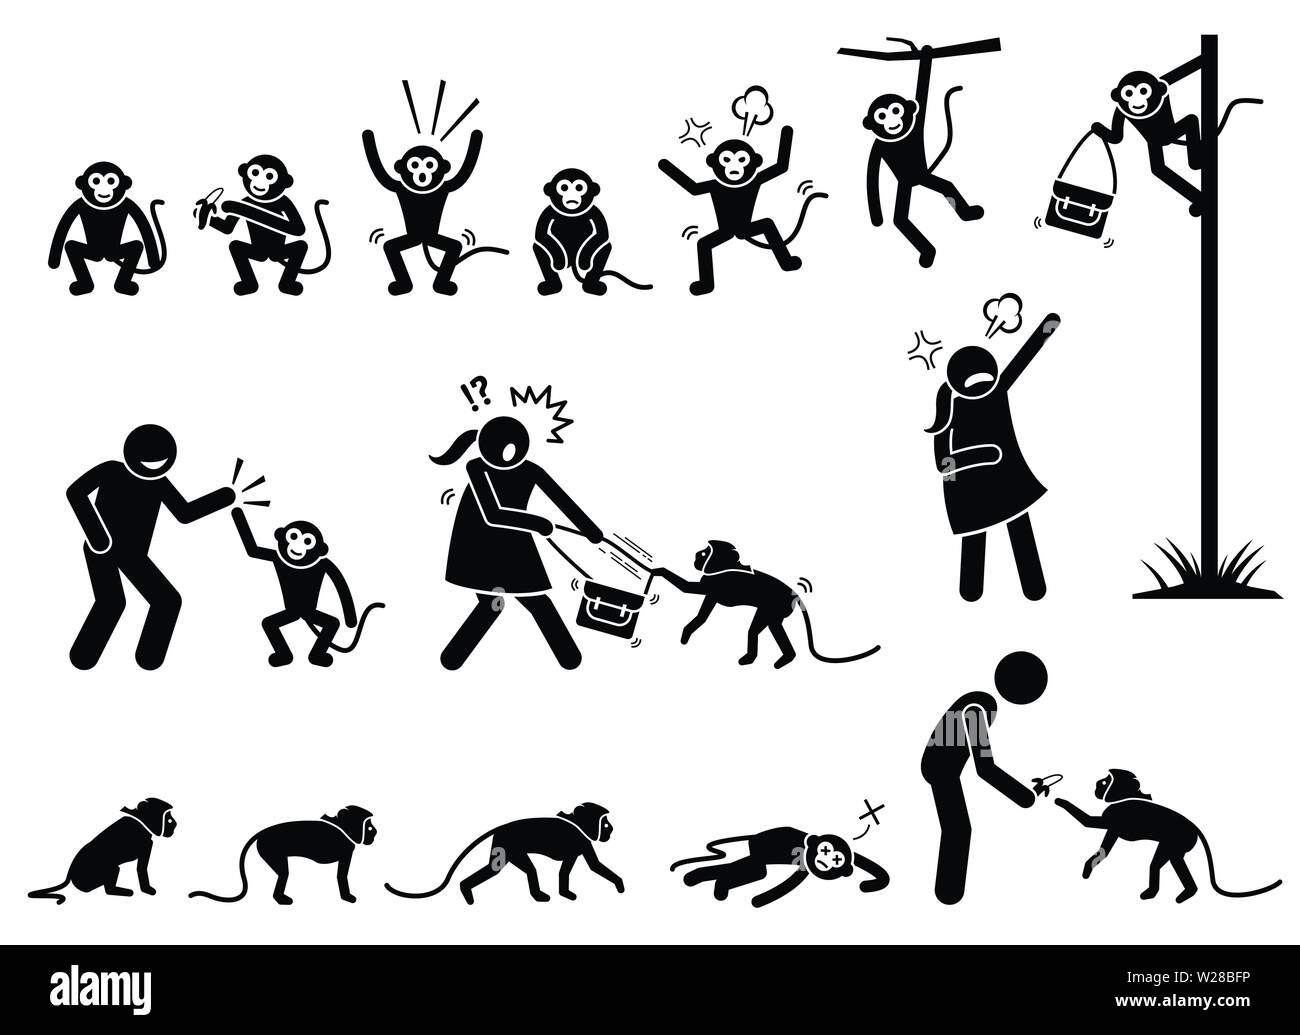 Human and monkey stick figure pictogram. Illustrations depict monkey actions and reactions such as eating, angry, climbing and walking. The naughty mo Stock Vector